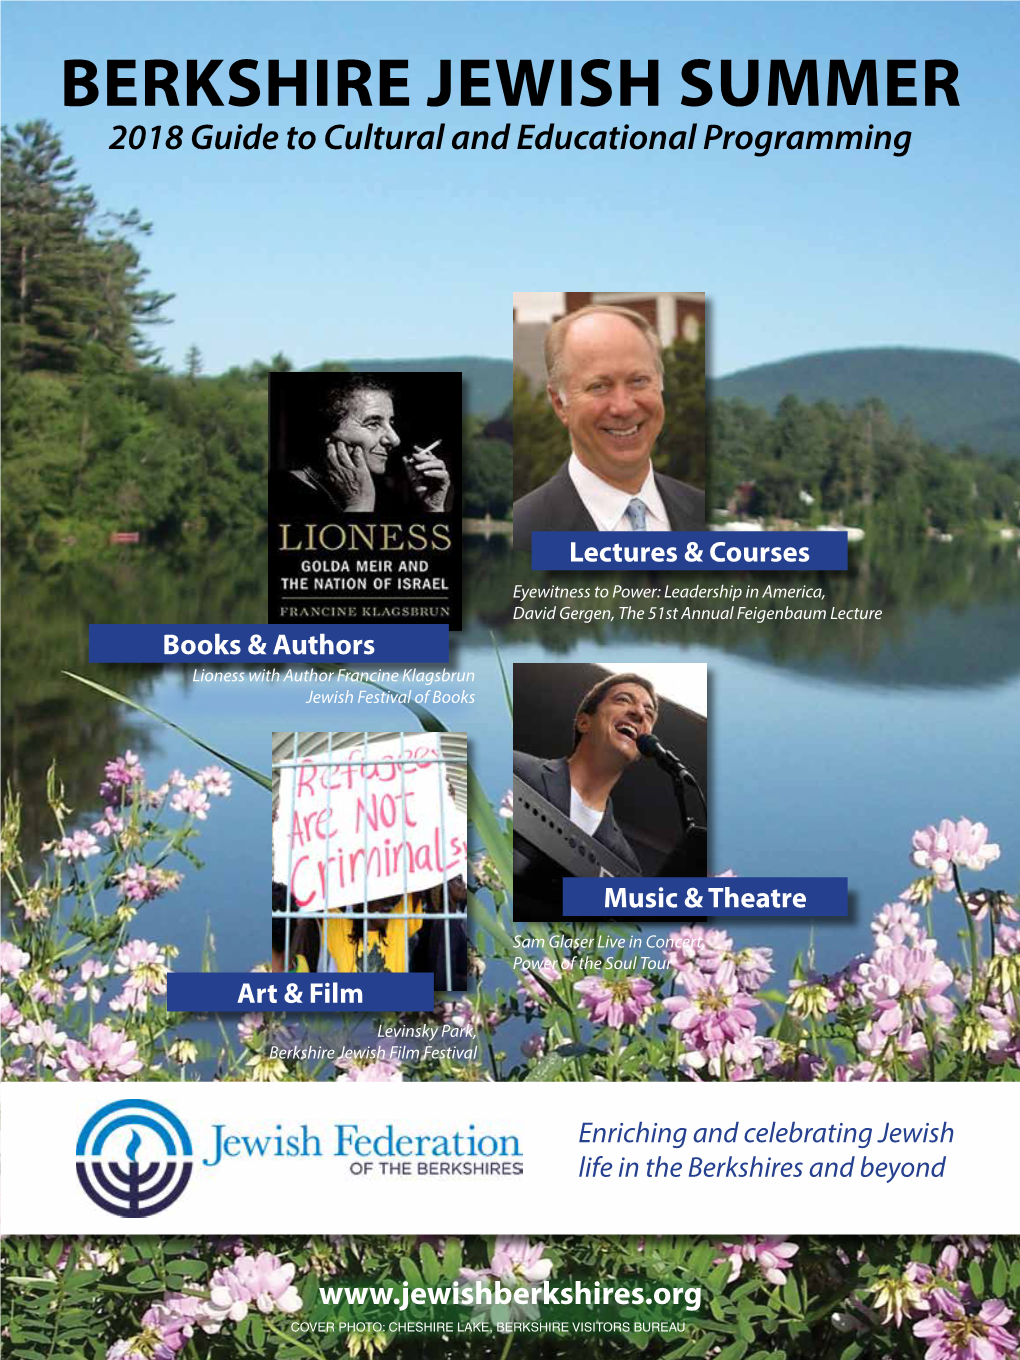 BERKSHIRE JEWISH SUMMER 2018 Guide to Cultural and Educational Programming